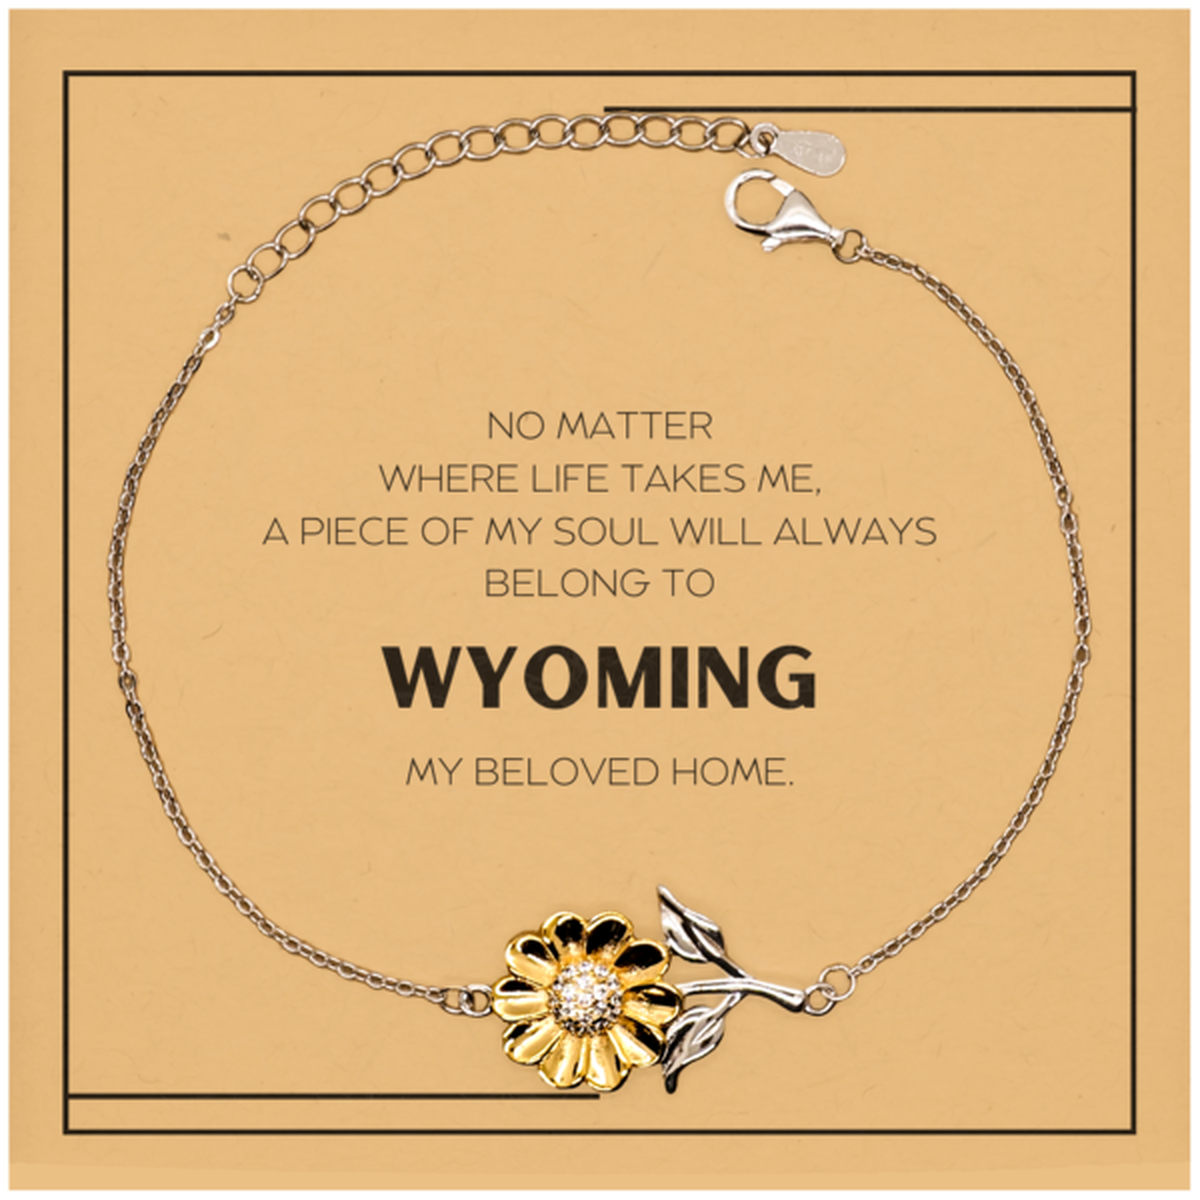 Love Wyoming State Gifts, My soul will always belong to Wyoming, Proud Sunflower Bracelet, Birthday Christmas Unique Gifts For Wyoming Men, Women, Friends